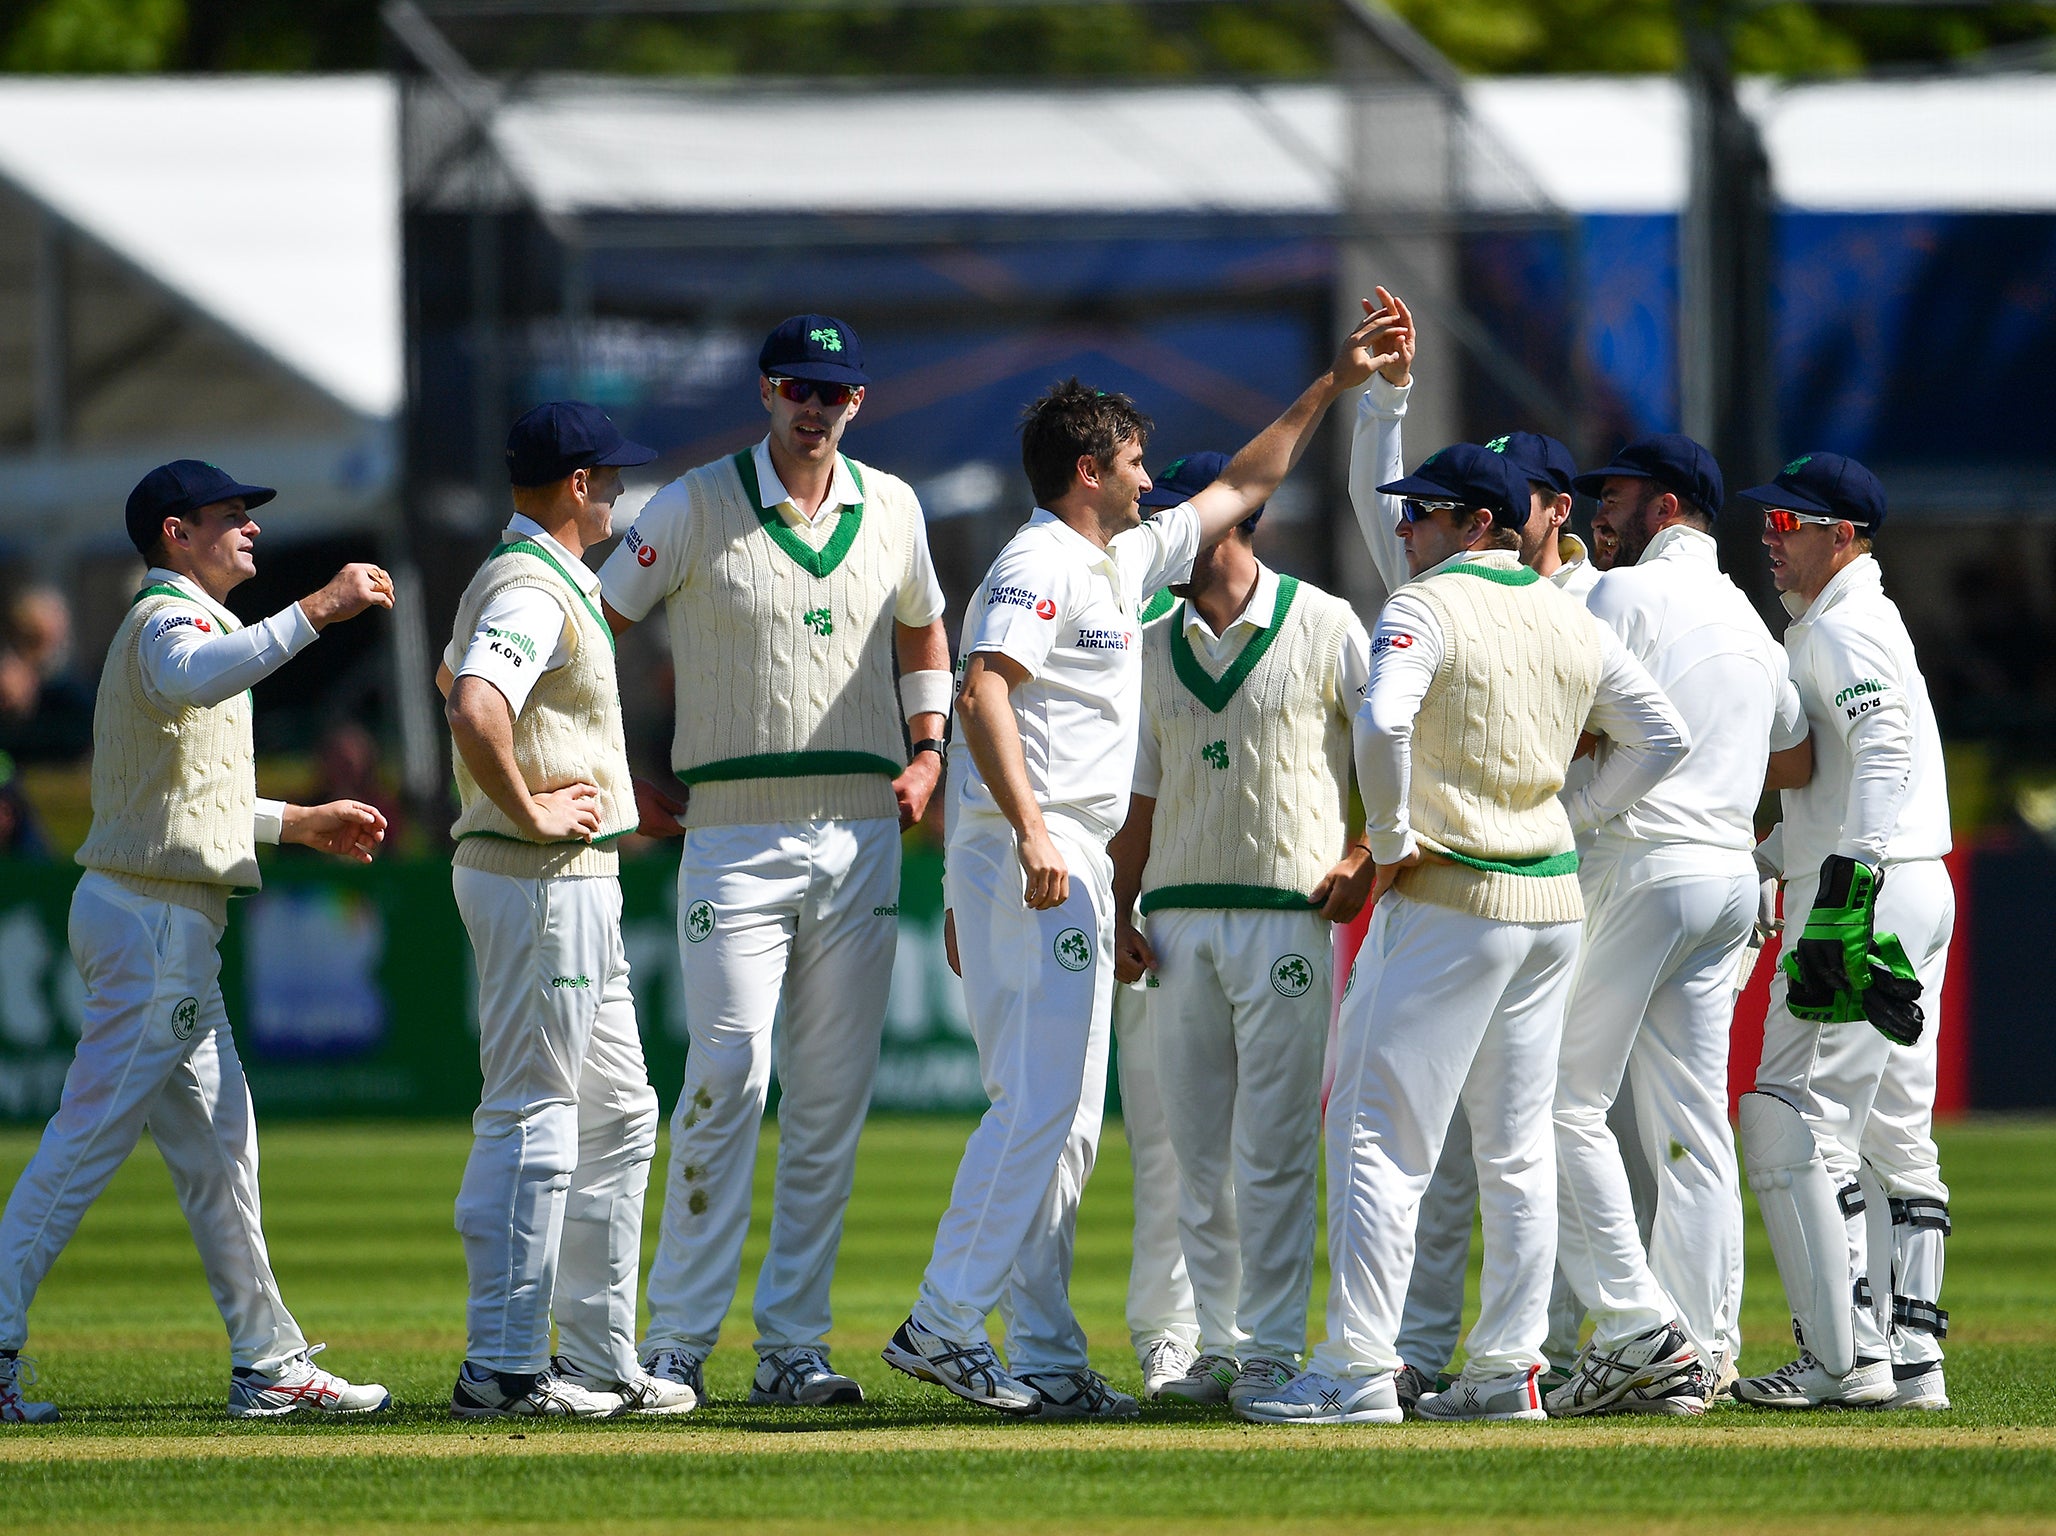 Ireland put up a good fight on the first day of their inaugural Test